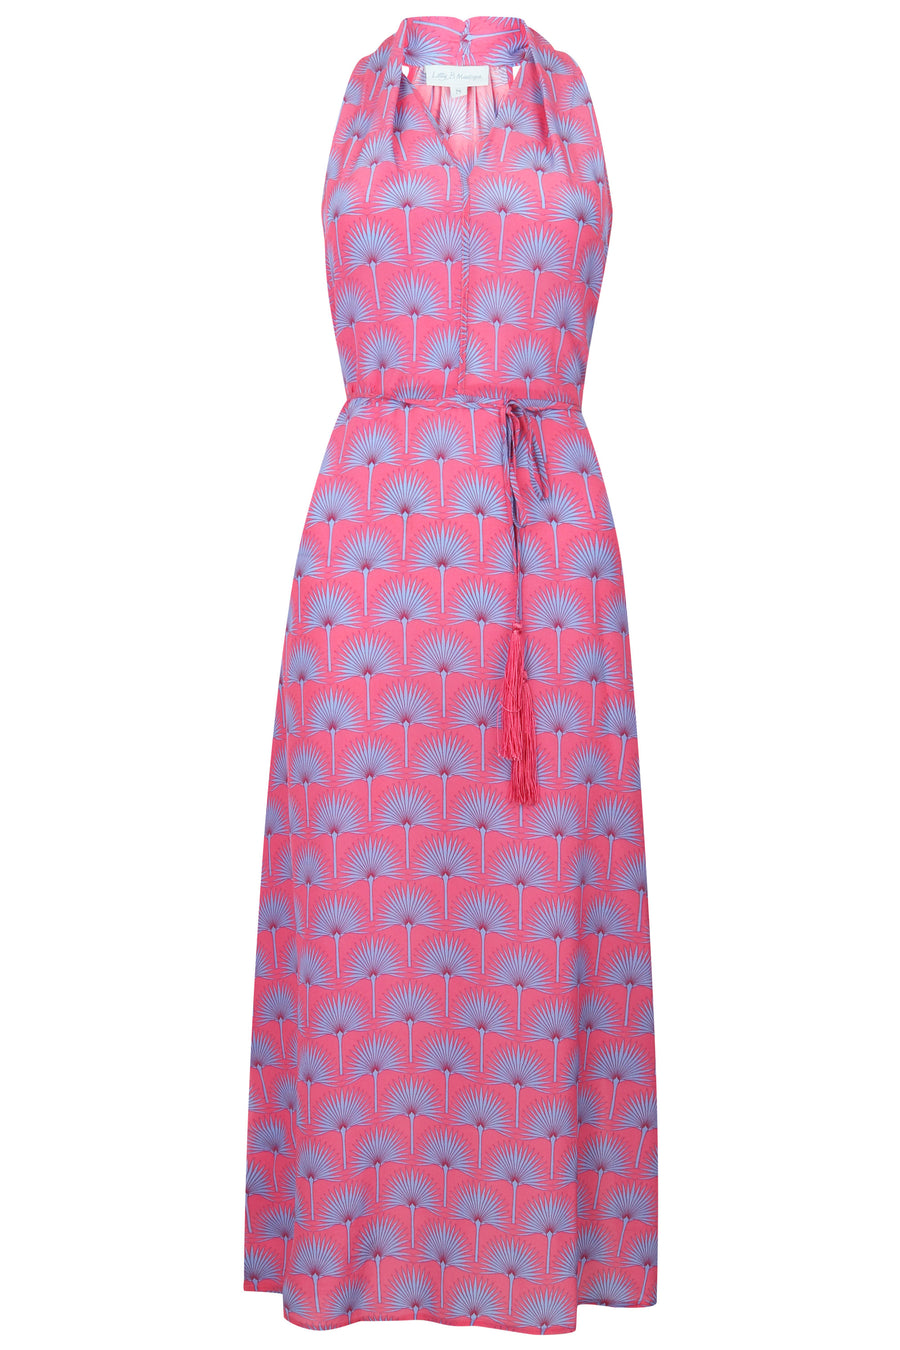 Lotty B 3/4 Halter Dress in Silk Crepe-de-Chine: SINGLE PALM REPEAT - PINK / BLUE vacation wear by Lotty B Mustique